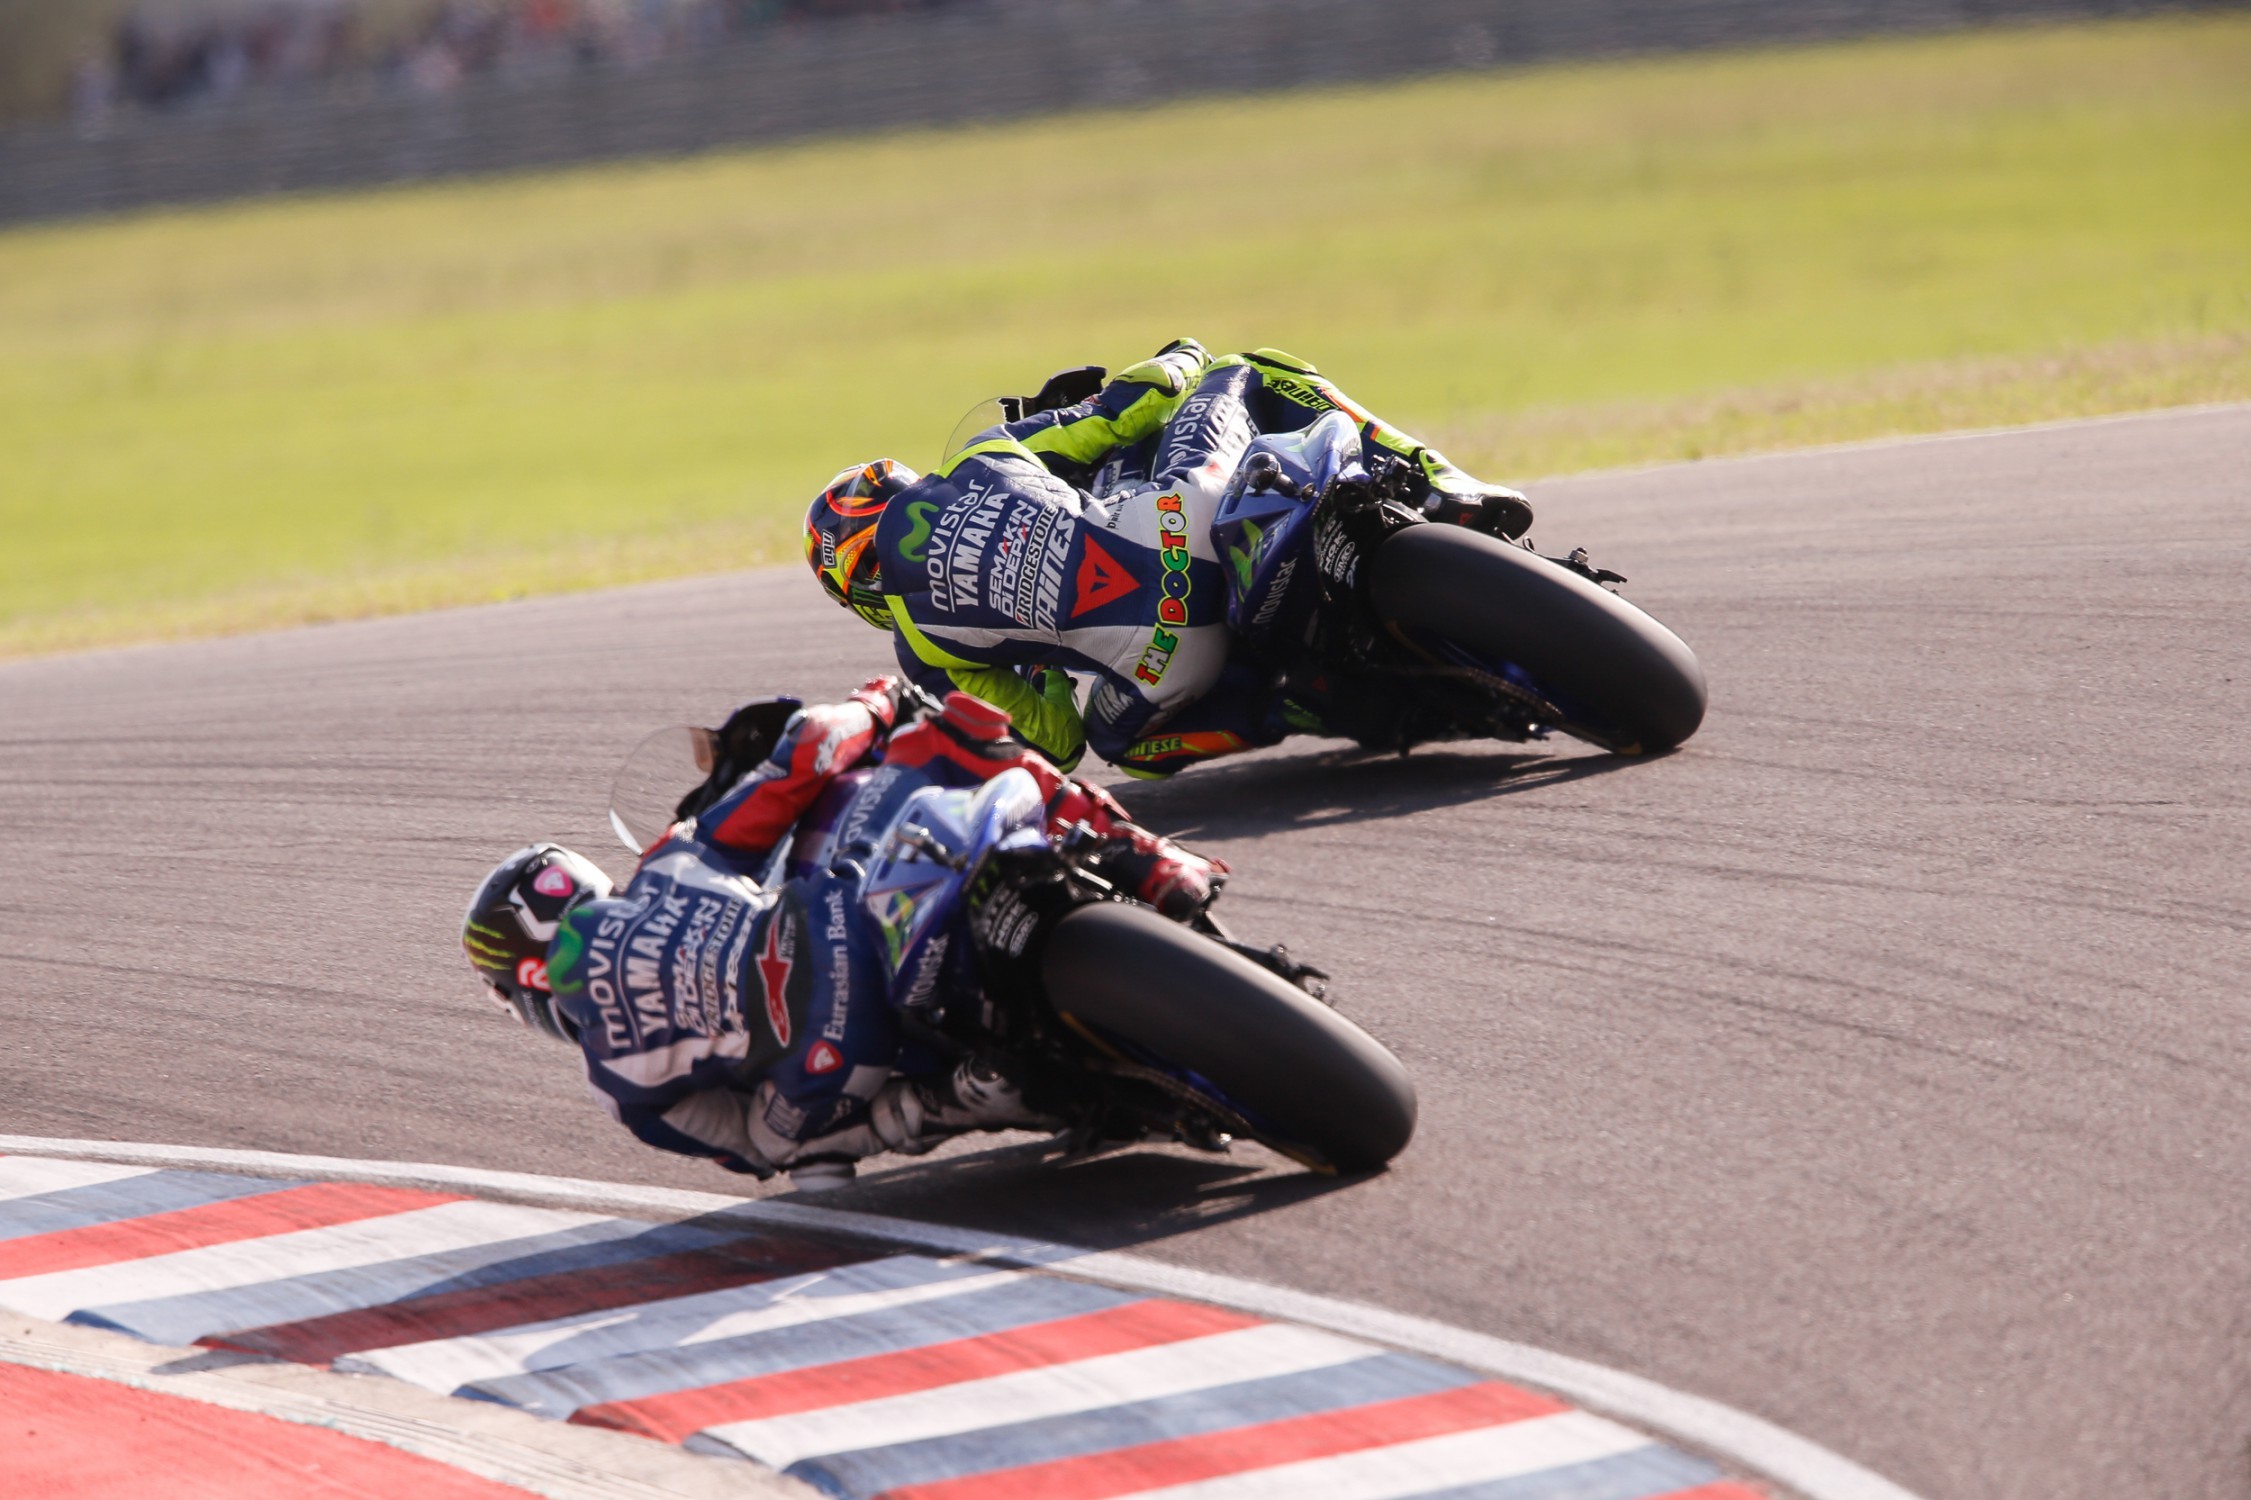 valentino-rossi-wins-in-argentina-thanks-to-smart-tire-strategy-dovizioso-and-crutchlow-on-podium-photo-gallery_14.jpg